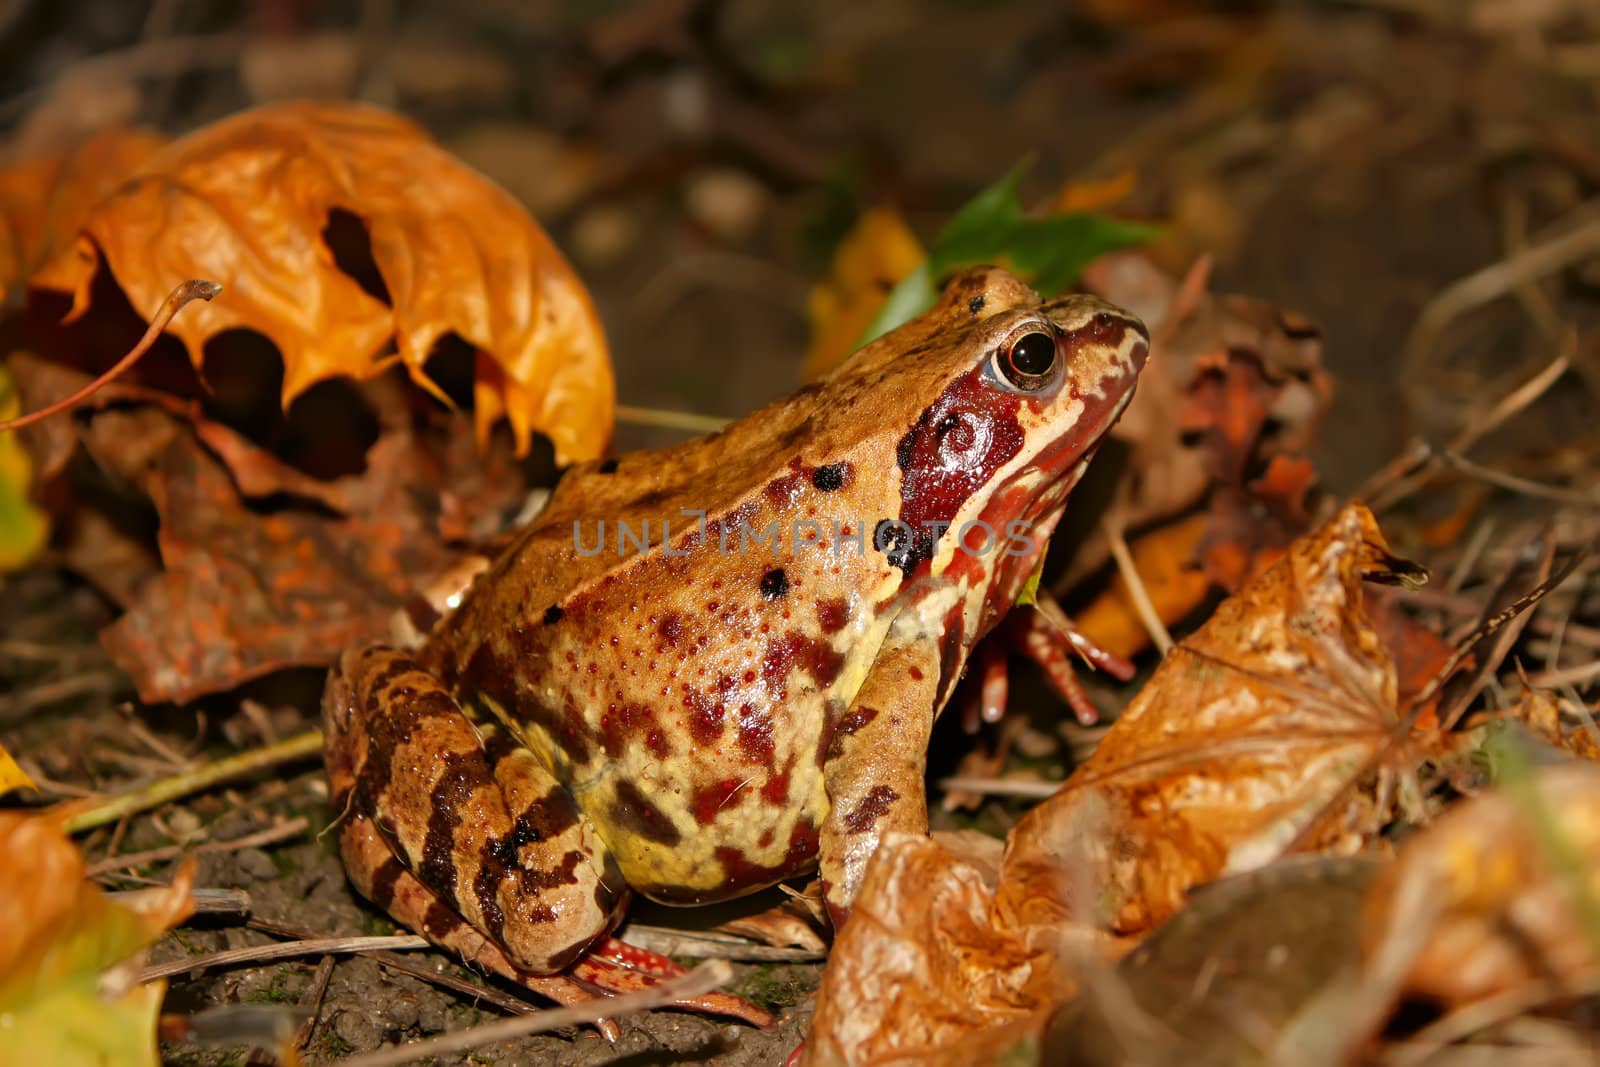 Meadows frog in the woods in autumn (II) by qiiip